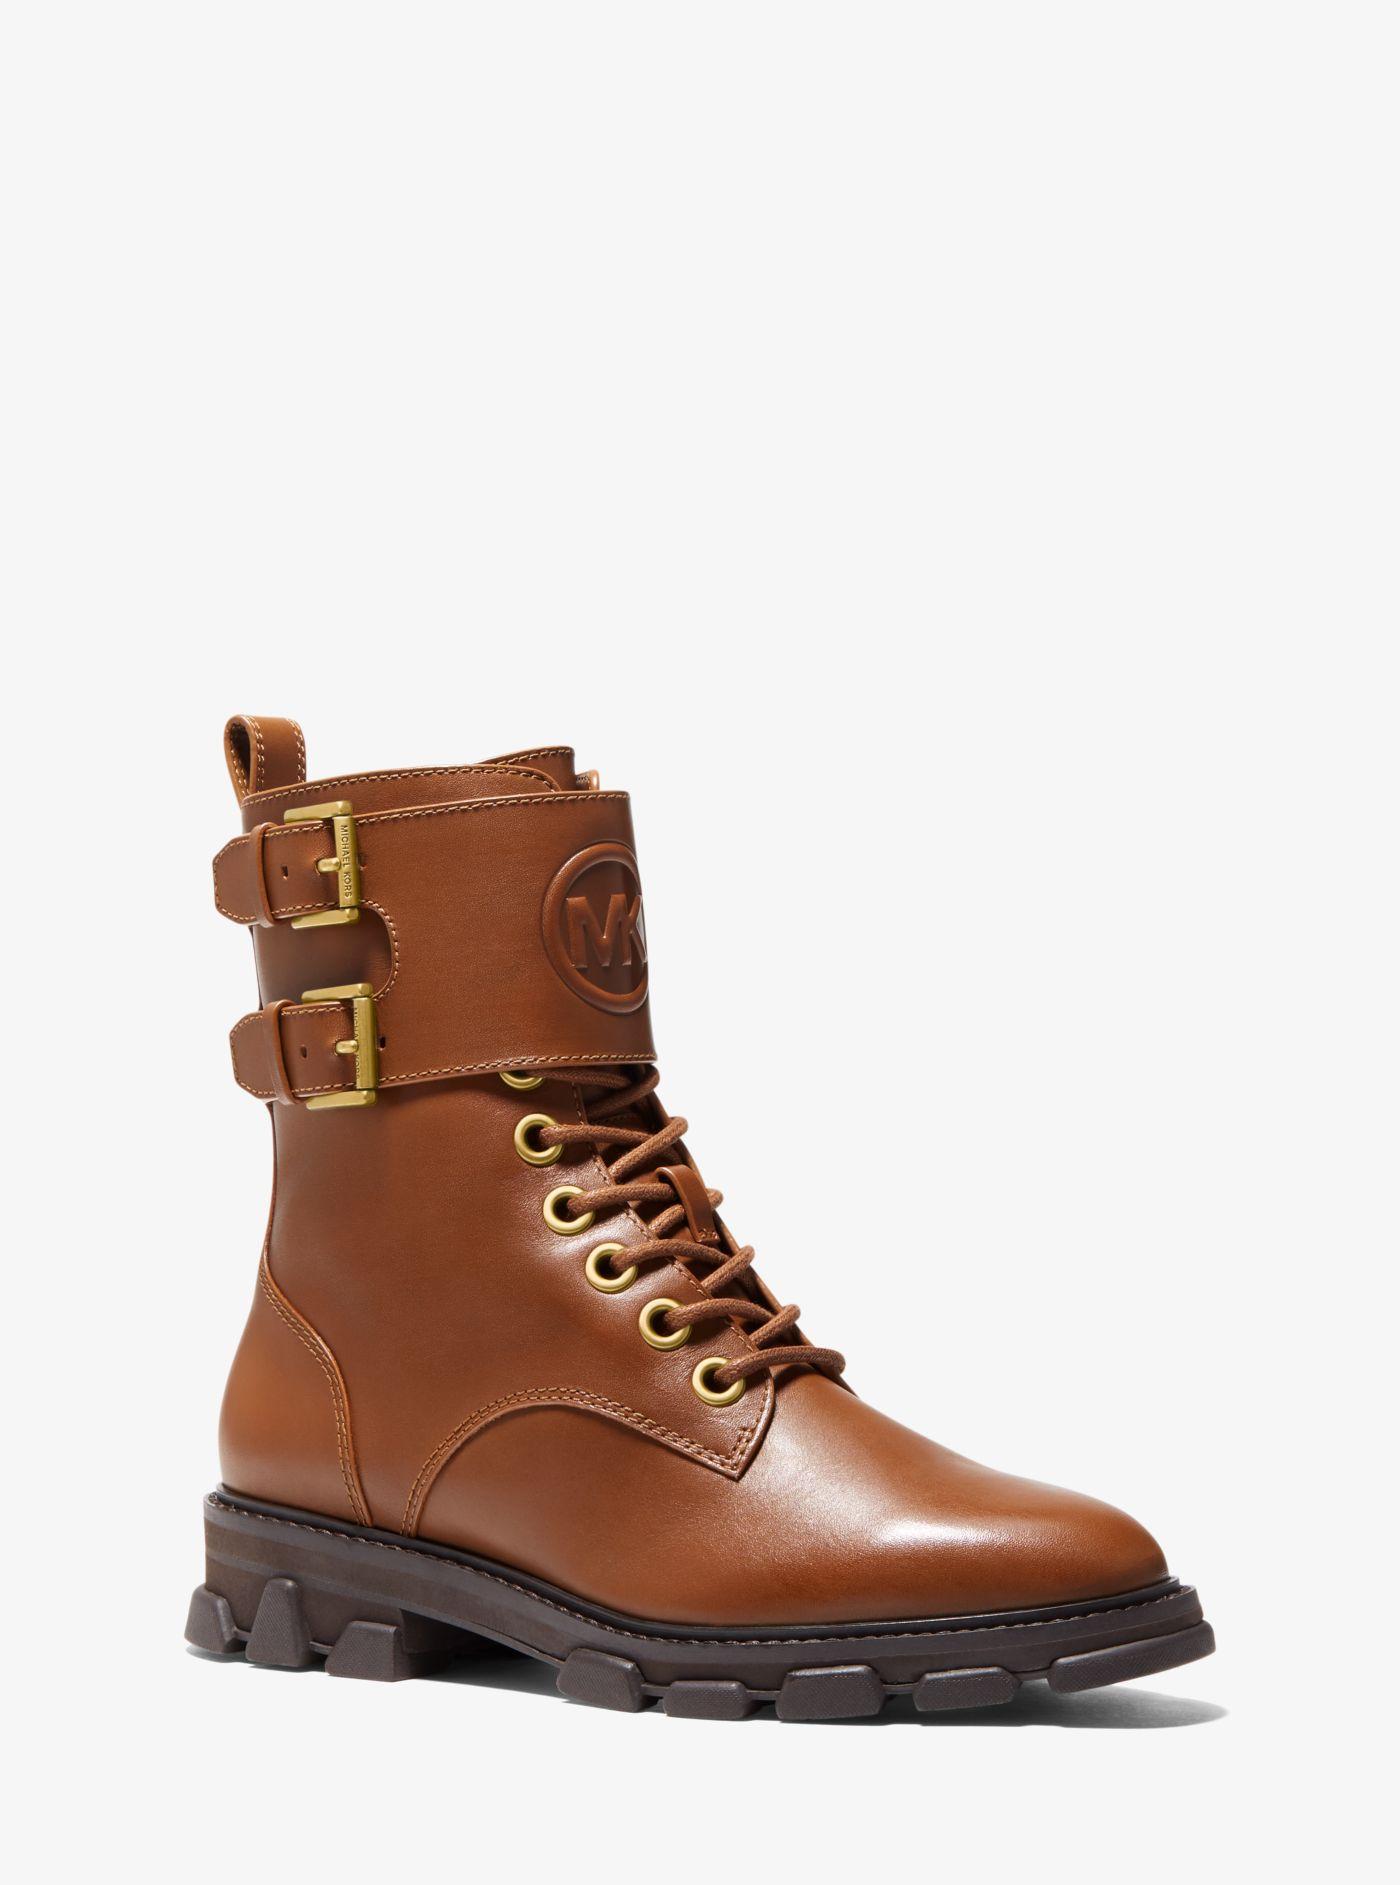 Michael Kors Ridley Leather Combat Boot in Brown | Lyst